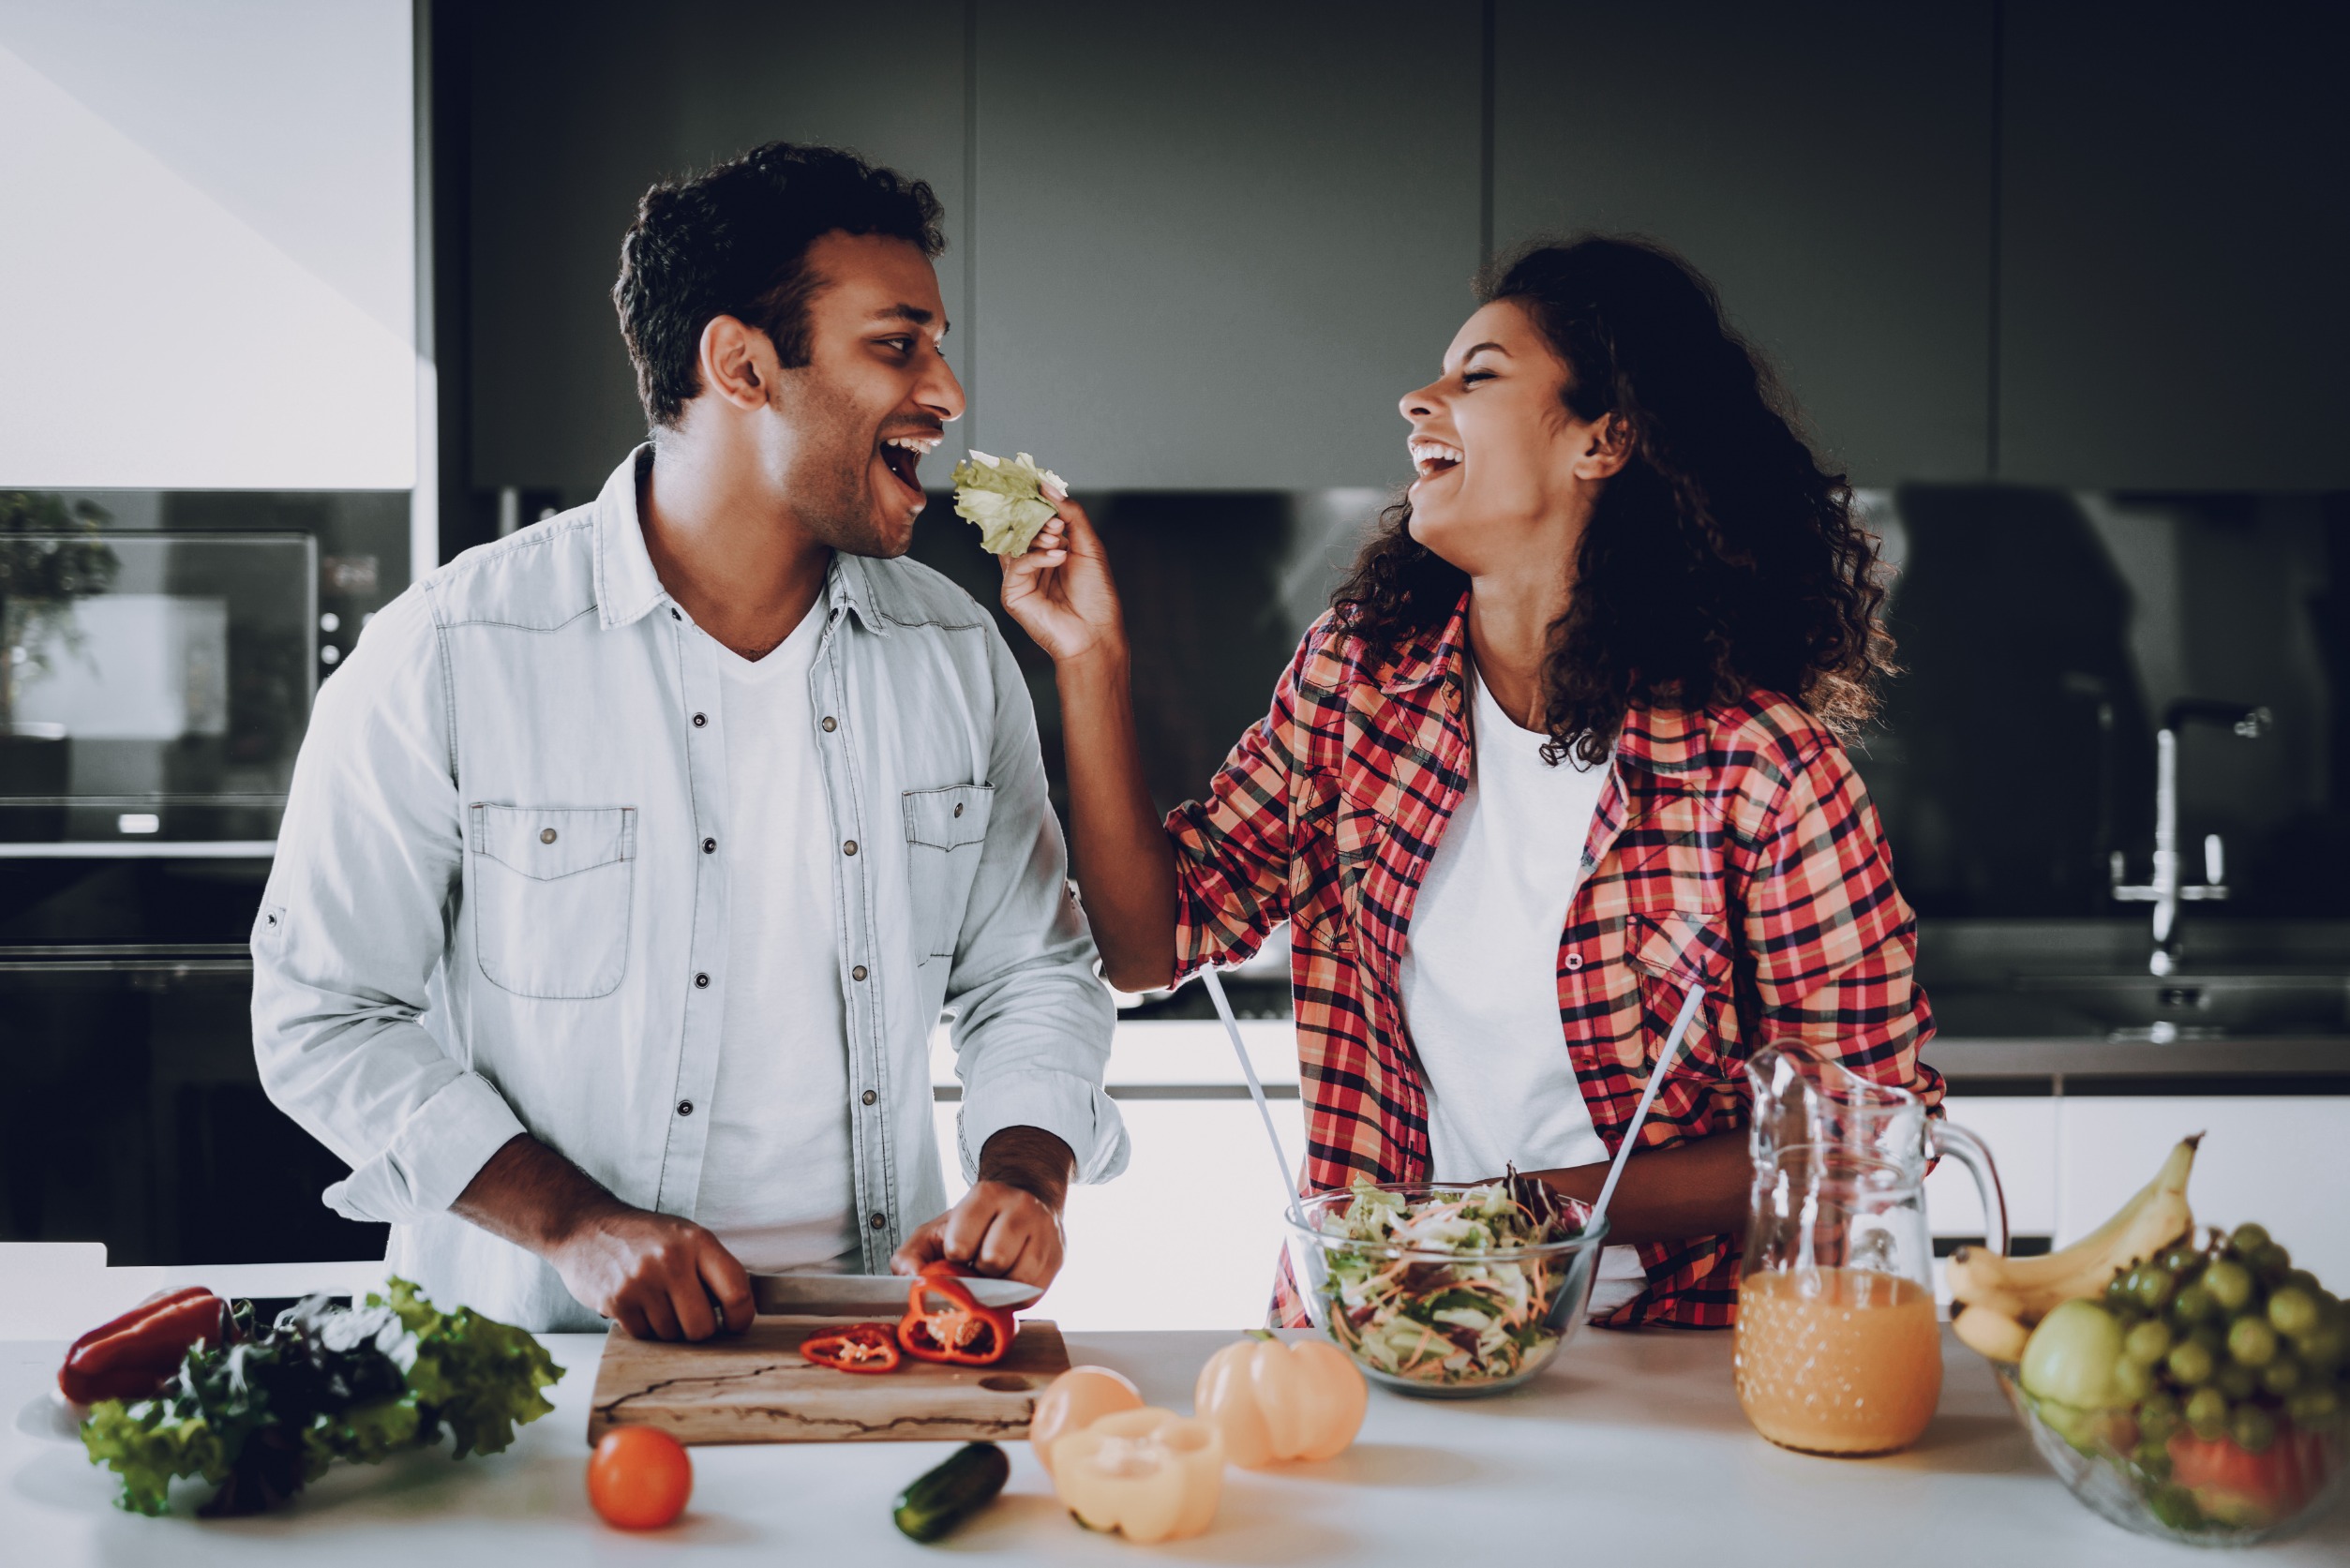 How Can I Improve My Relationship with Food?